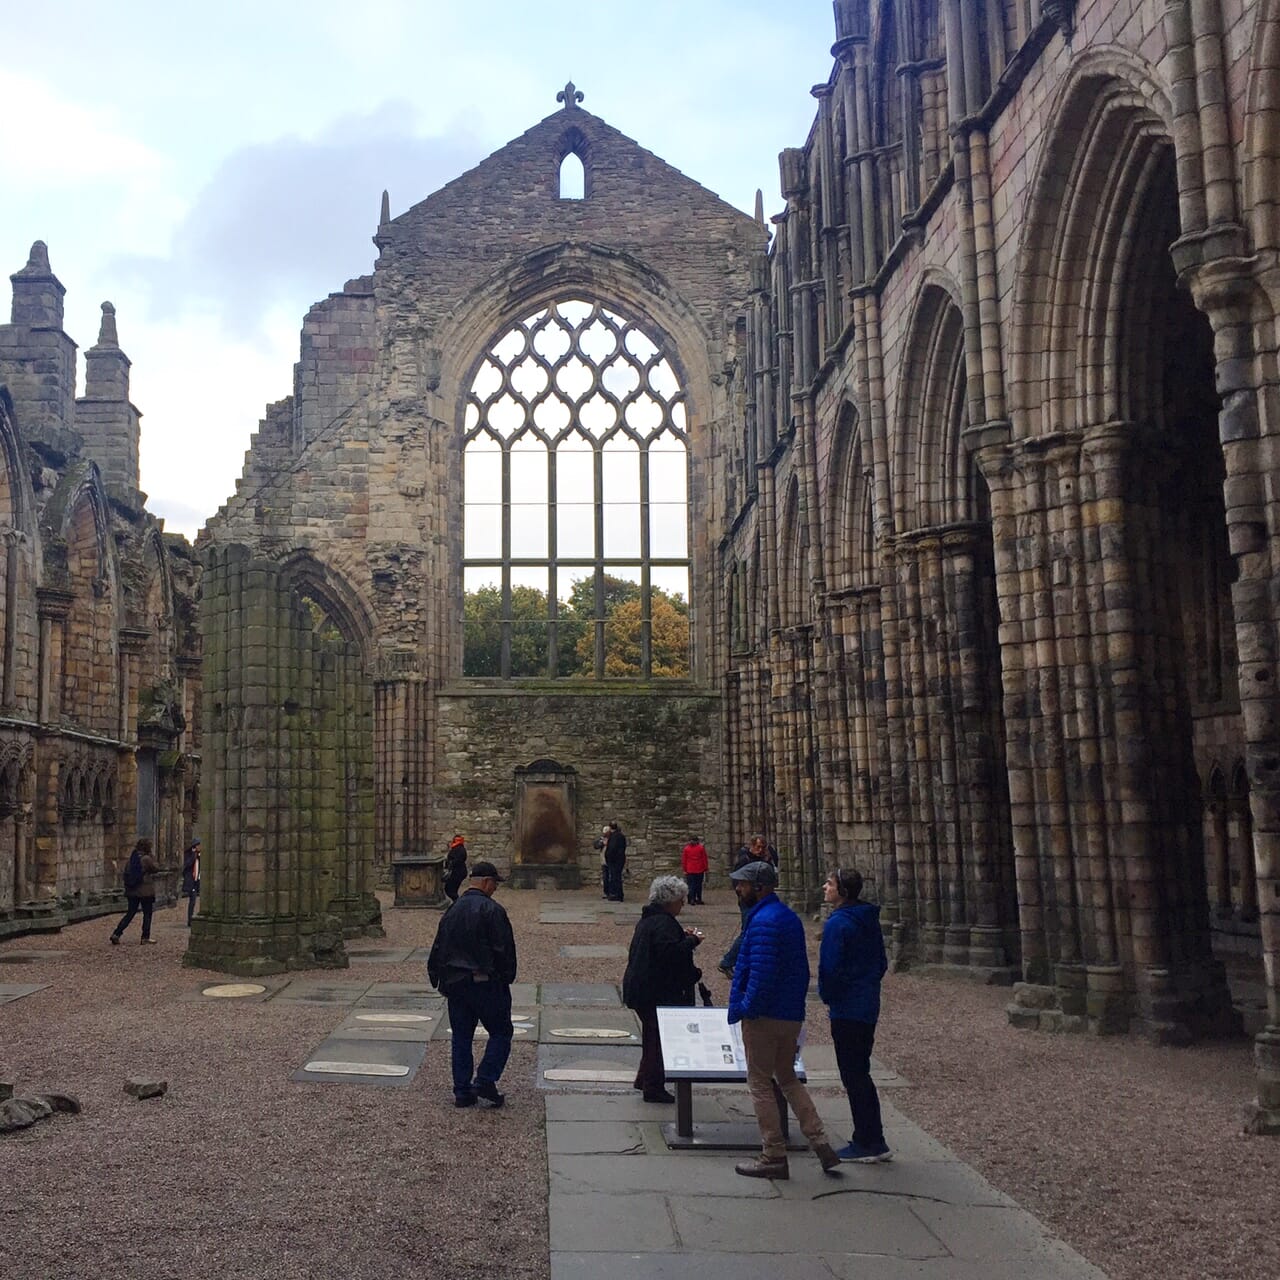 The Nave of the Holyrood Abbey